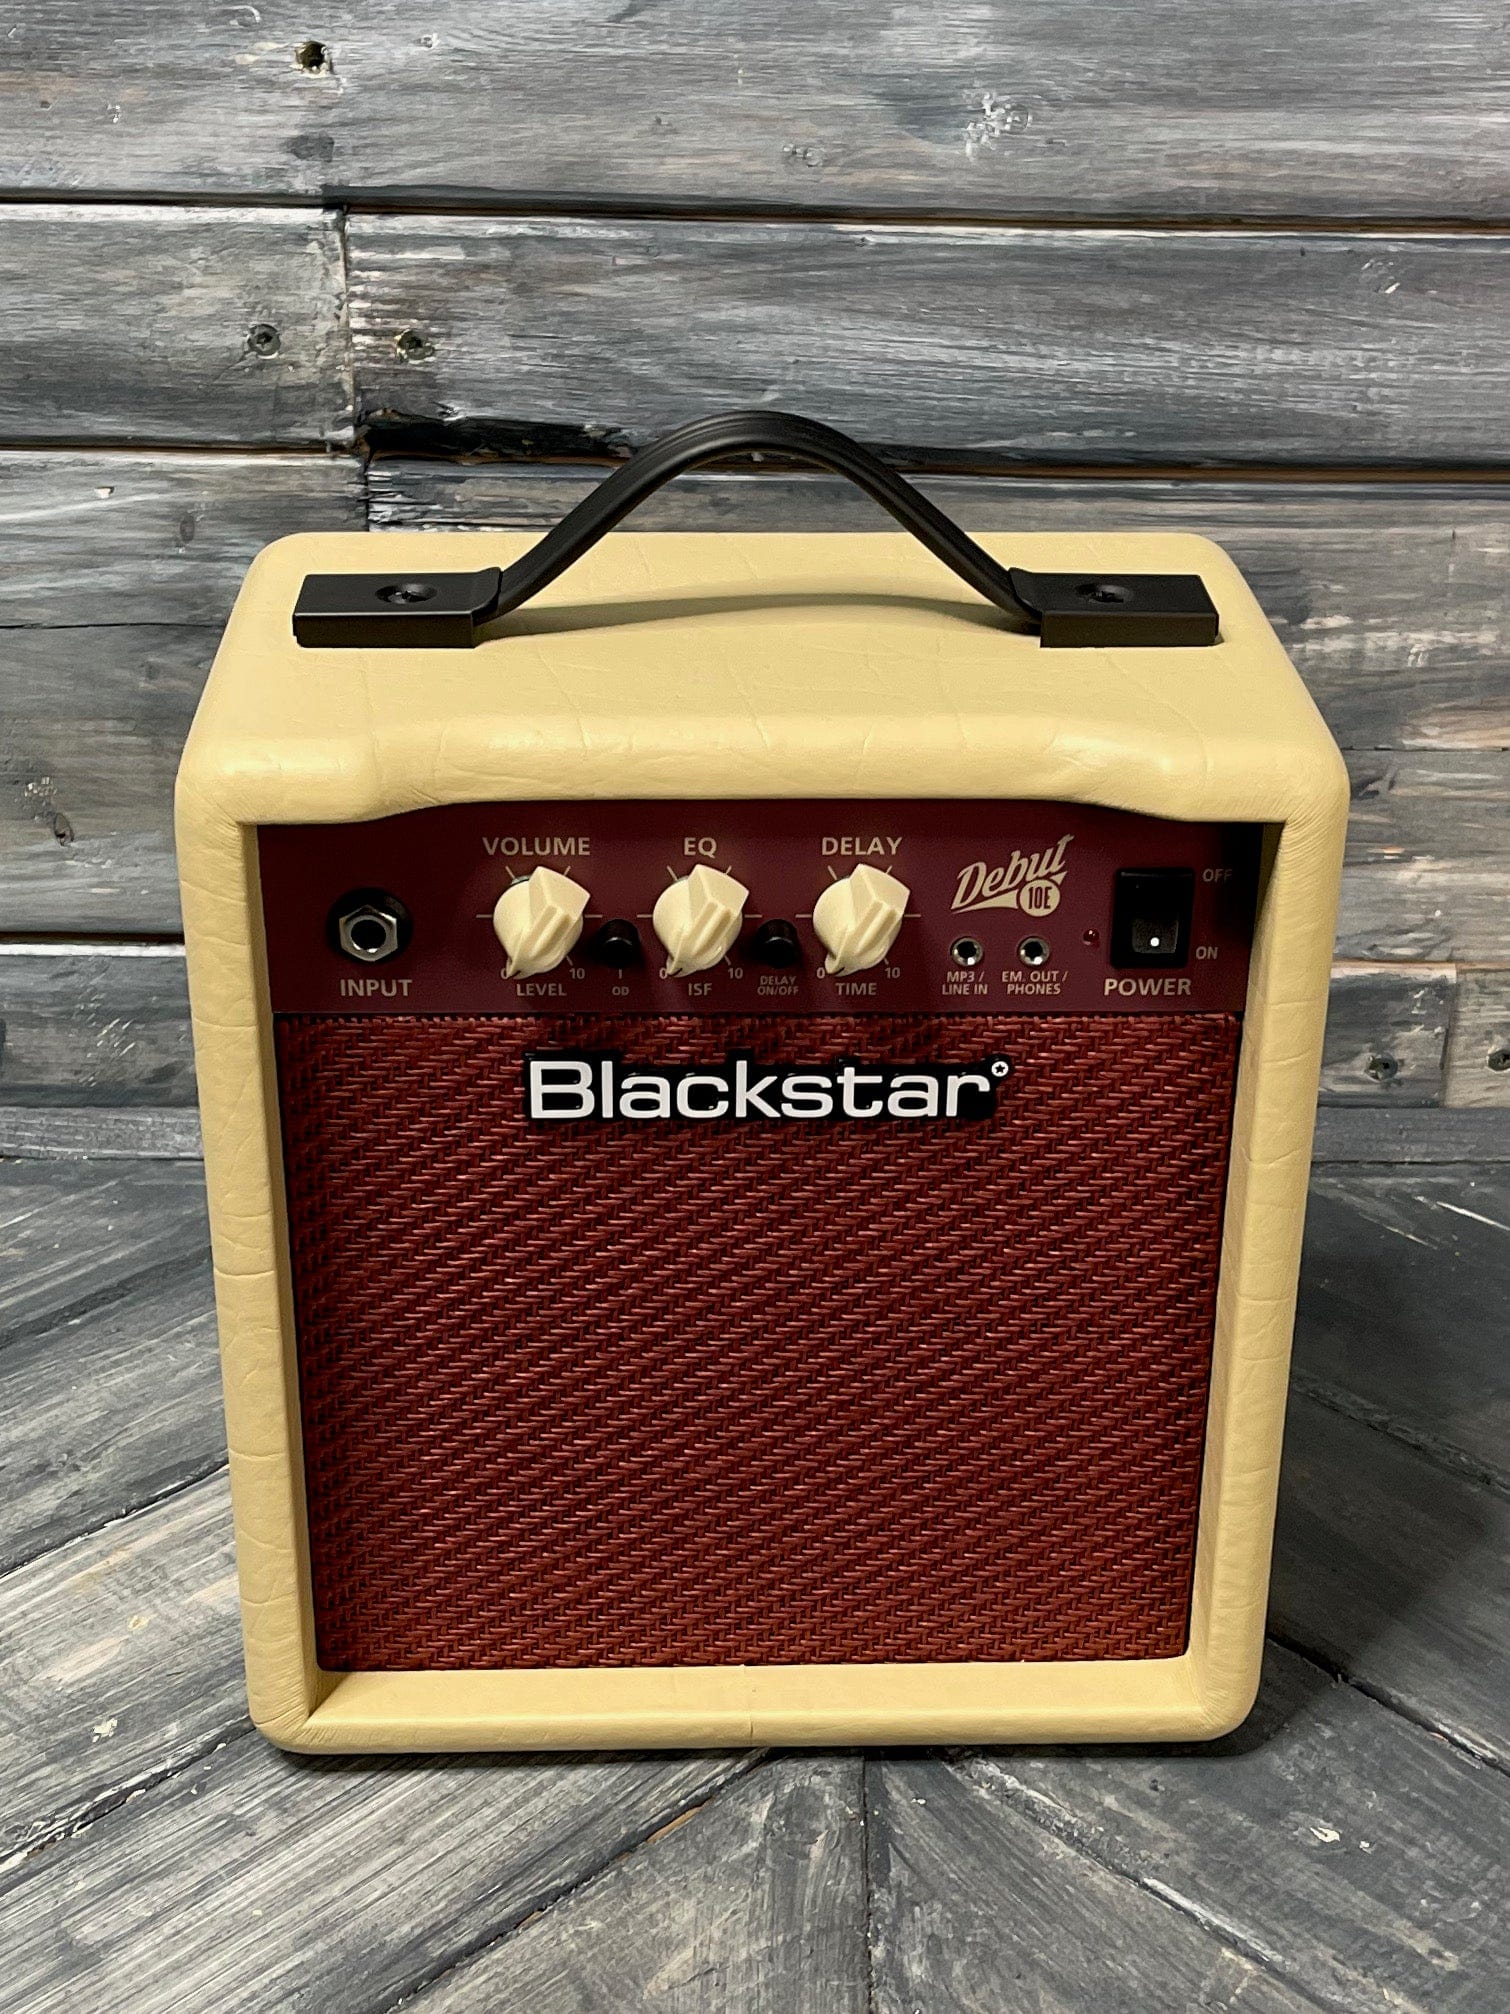 Blackstar Debut 10E front of the amp